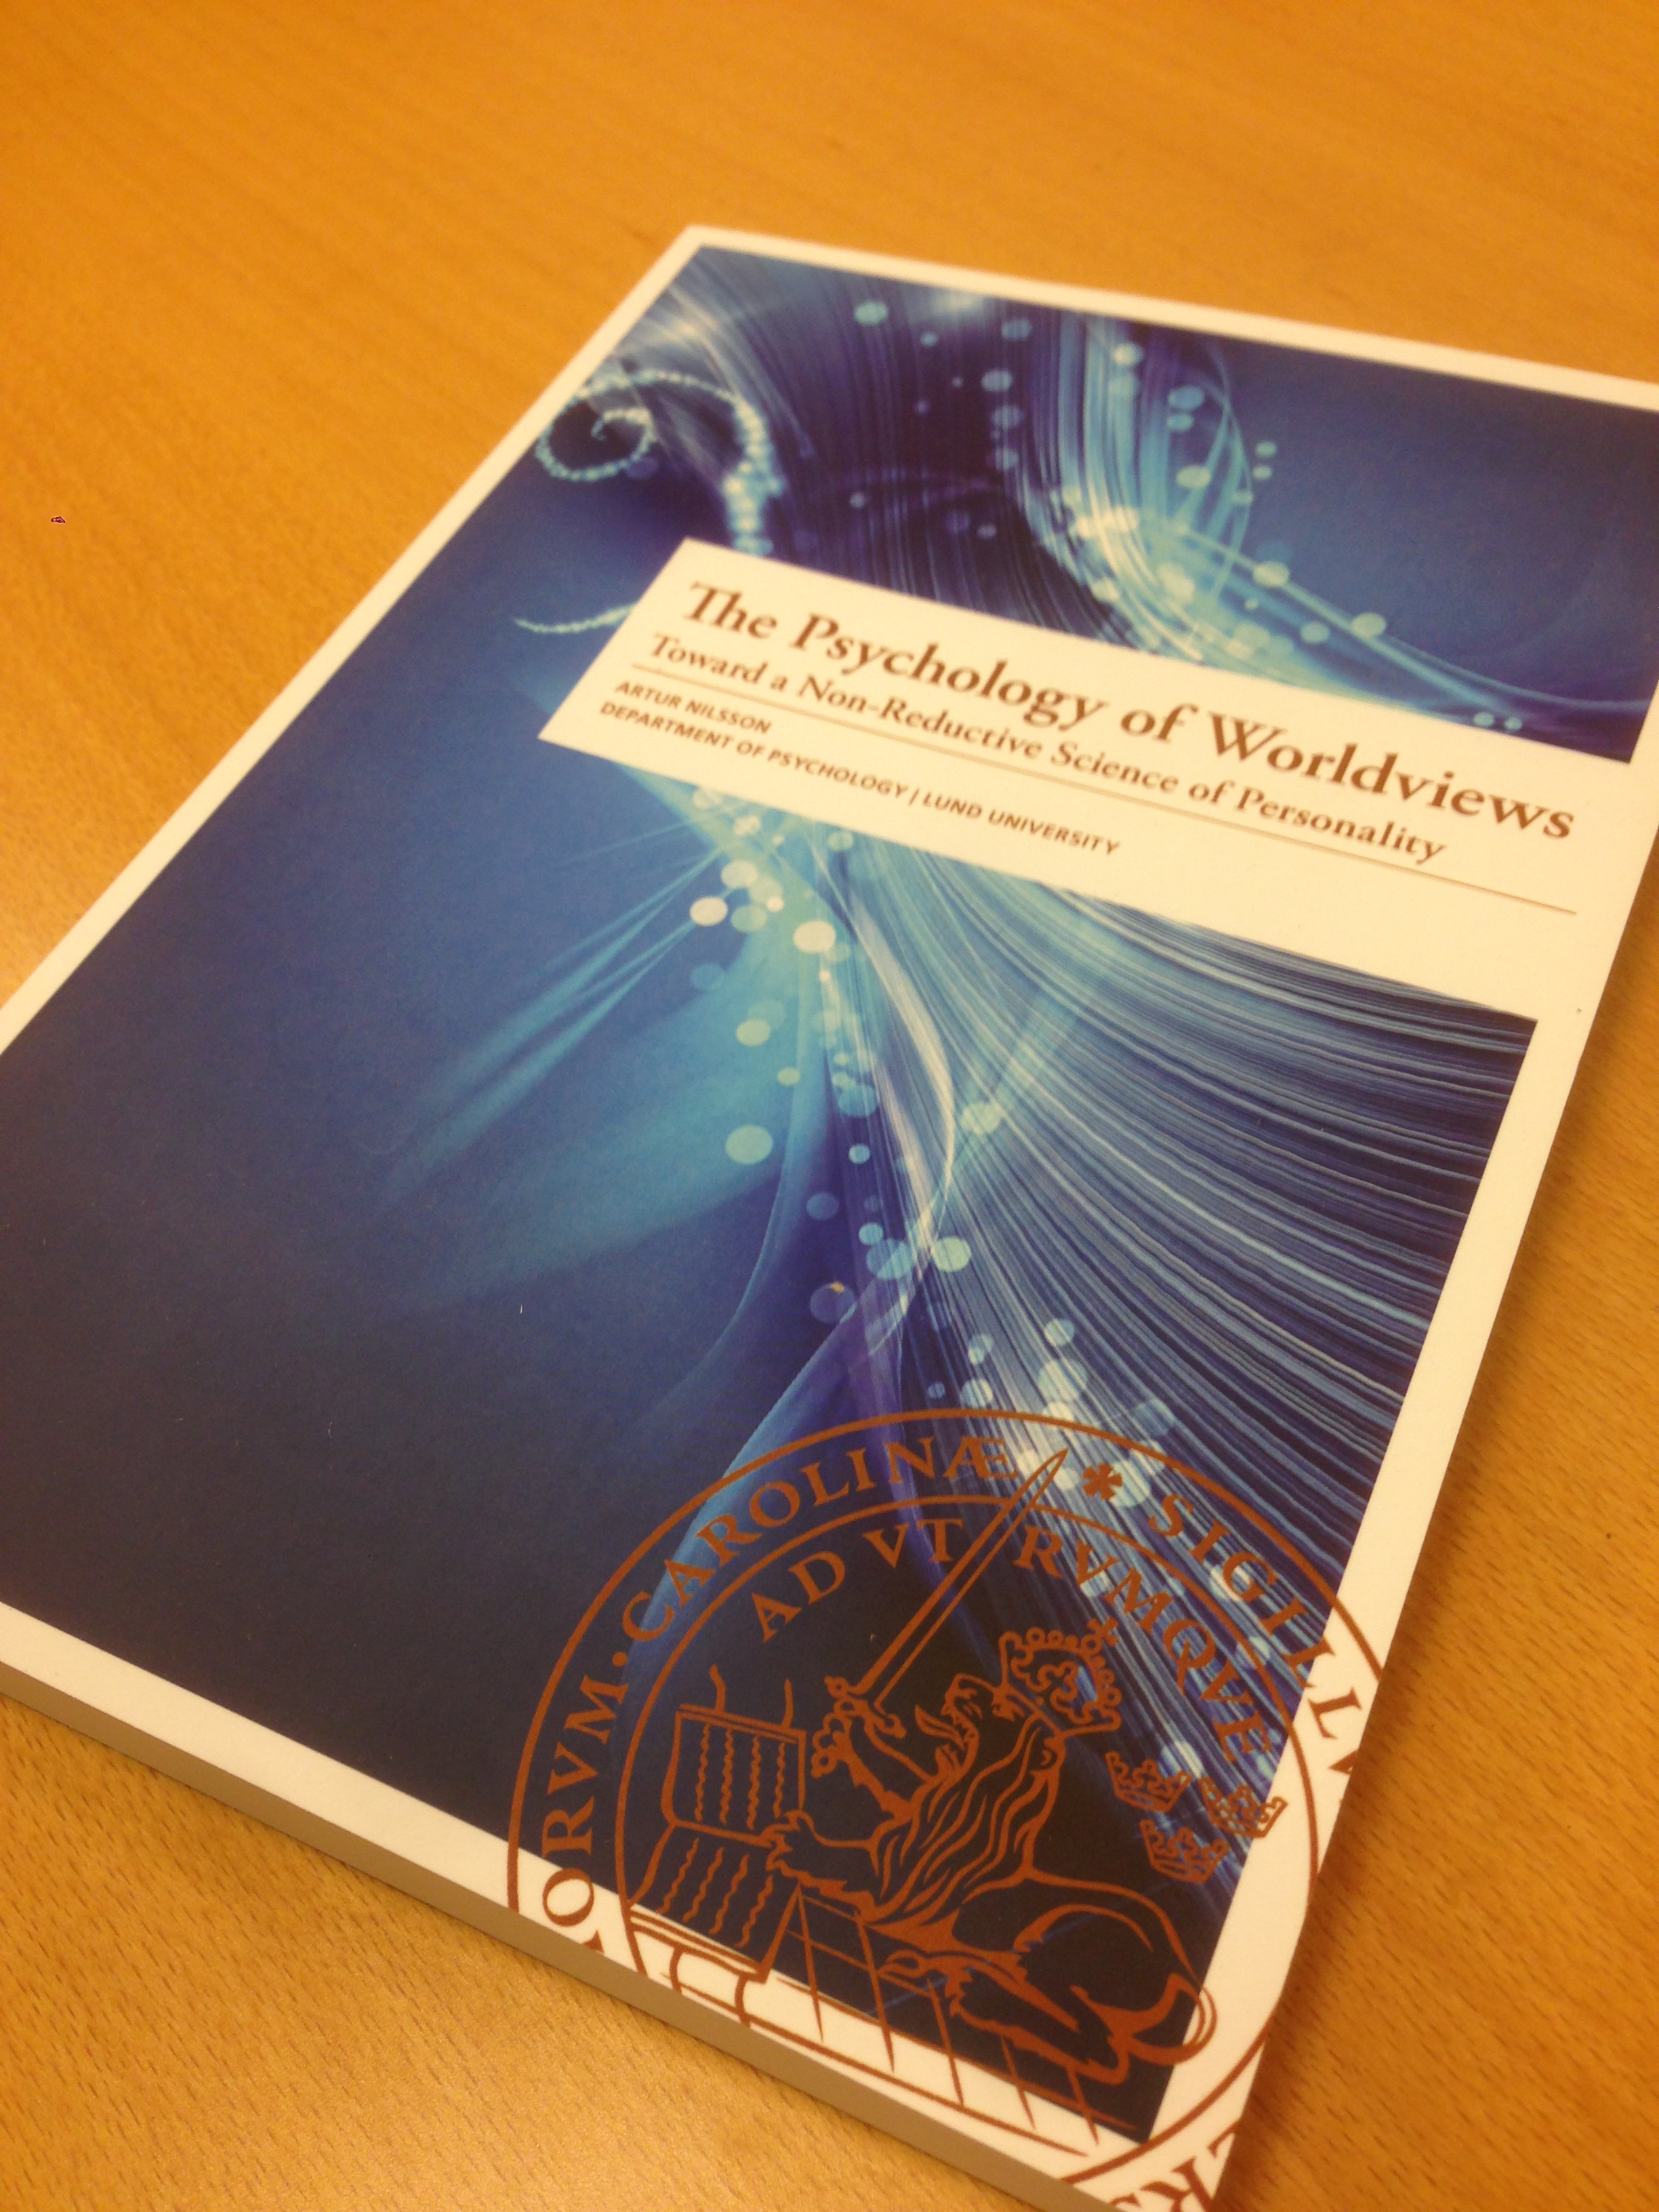 Picture of Artur Nilsson's doctoral dissertation in psychology